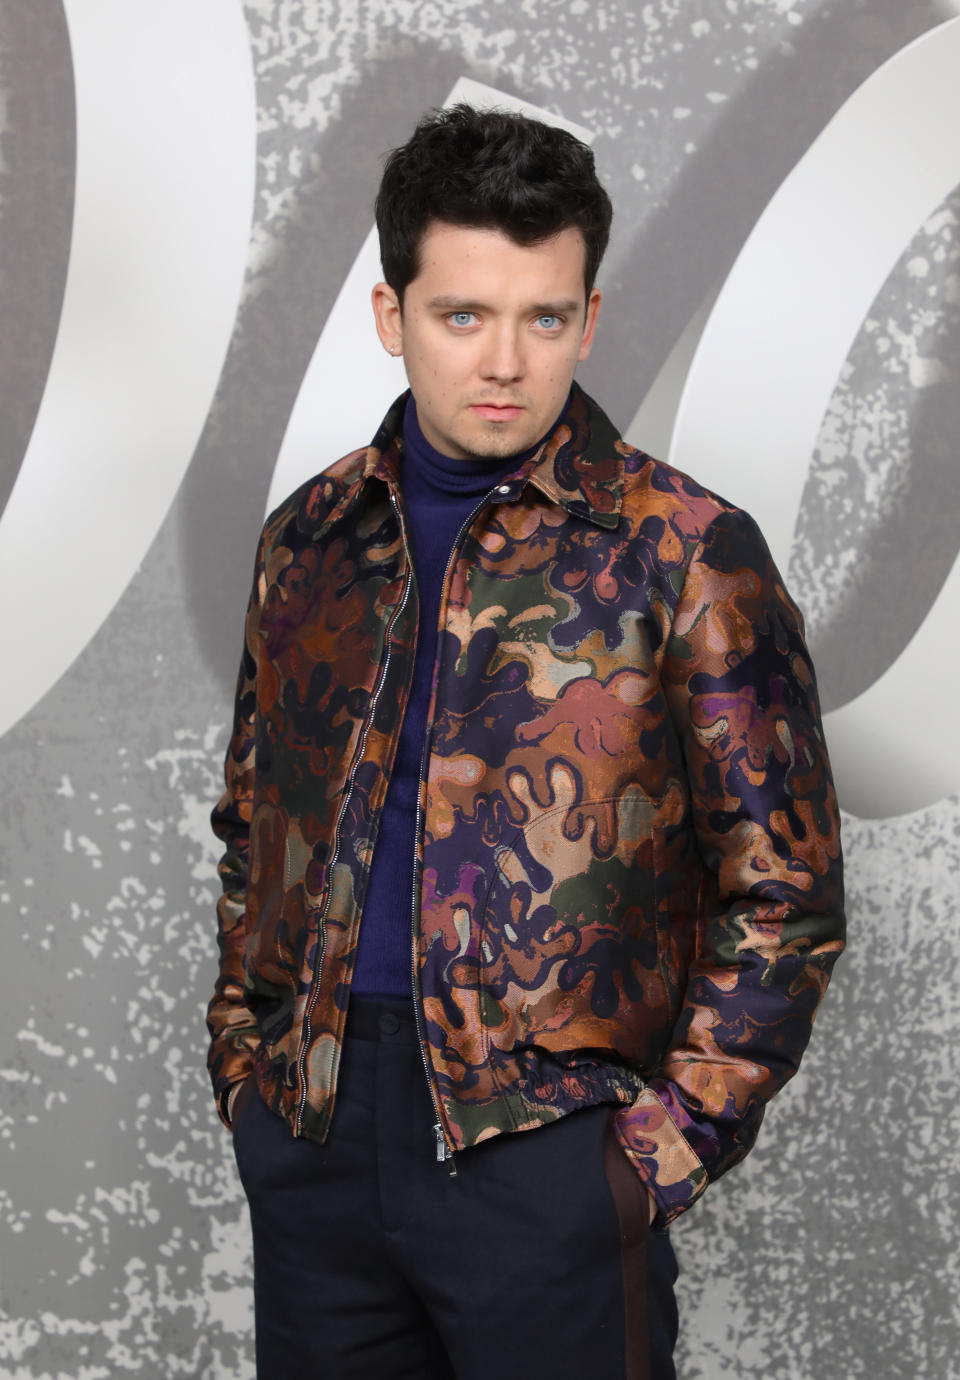 closeup of Asa in a colorful jacket at an event